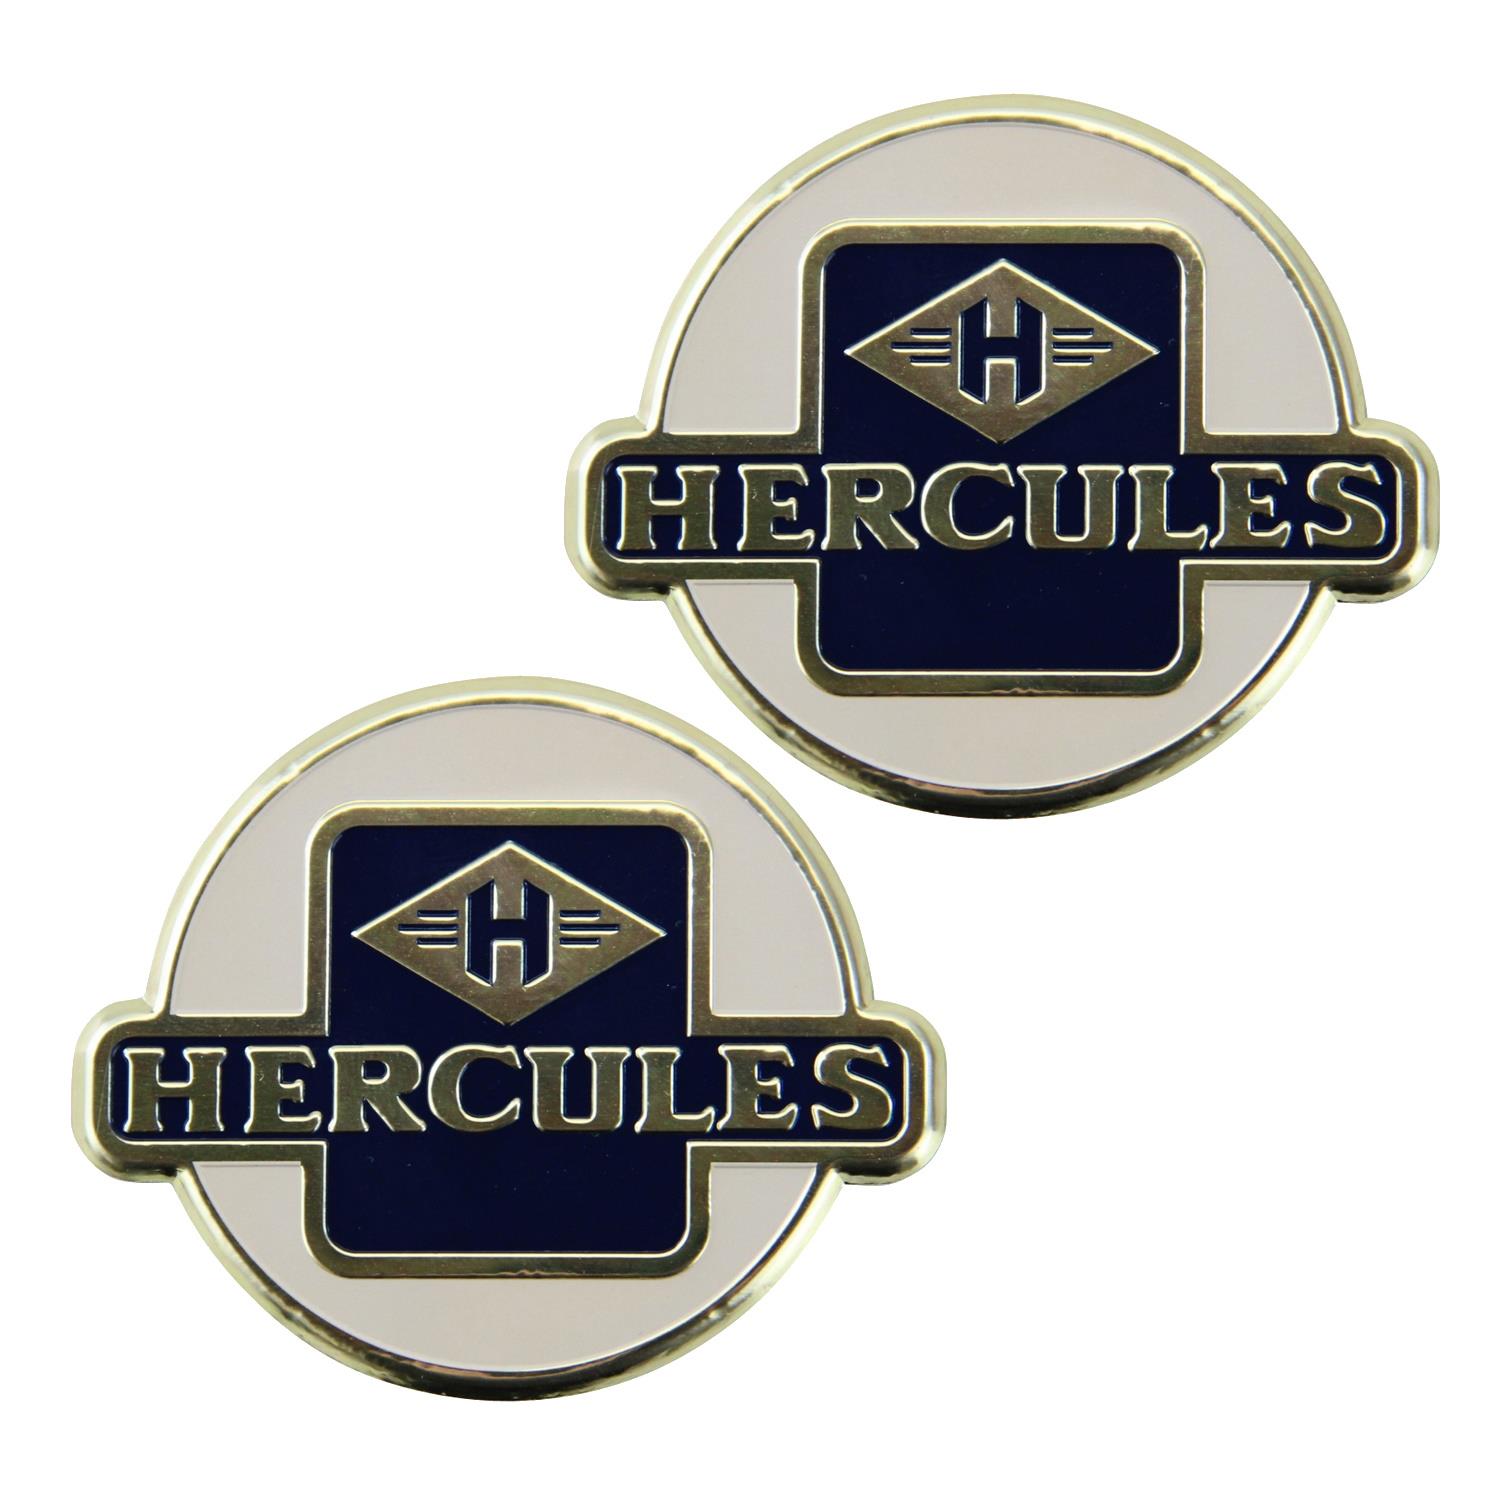 Tank emblem set - 2 emblems for Hercules K 50 100 125, MK 50, K 105, K 125,  GS 75, Stickers & Decals, Styling & Accessories, Moped accessories, Moped parts